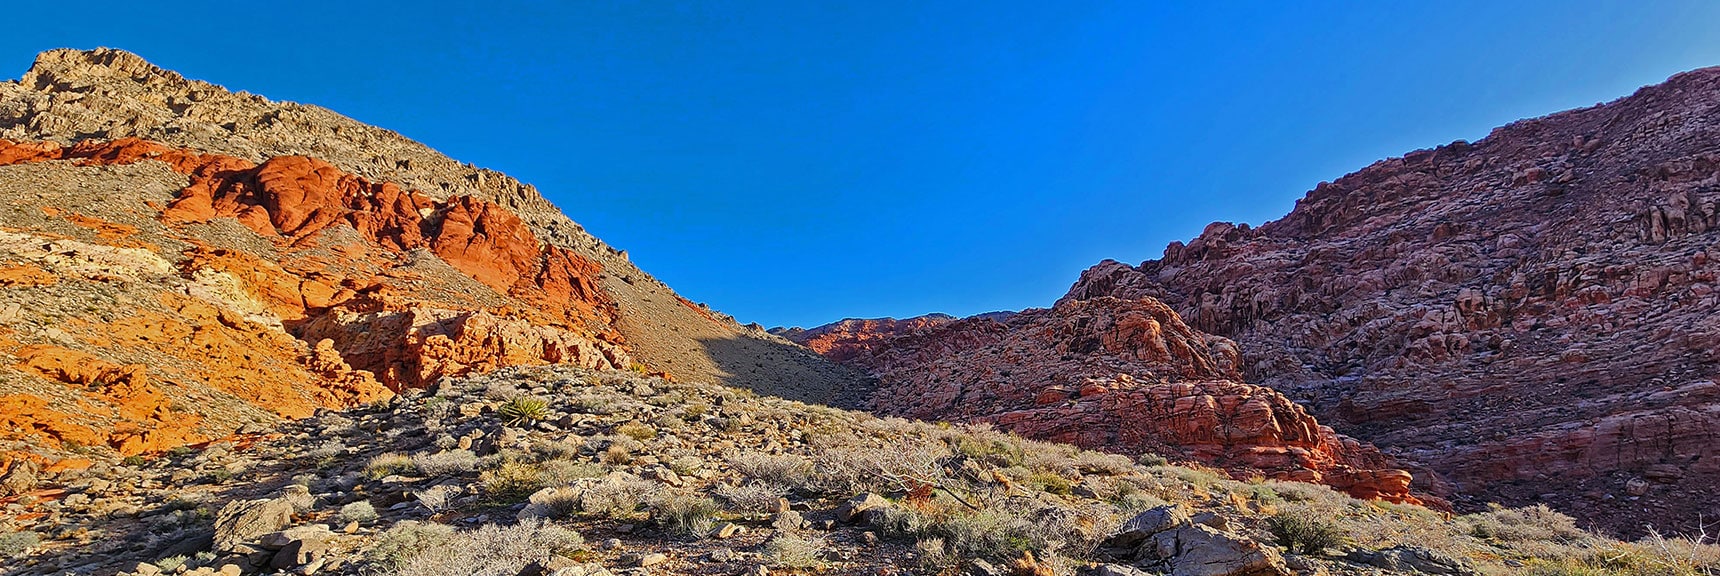 View Up Ash Canyon Through Its Lower Opening | Ash Canyon to Calico Tanks | Calico Basin and Red Rock Canyon, Nevada | David Smith | Las Vegas Area Trails